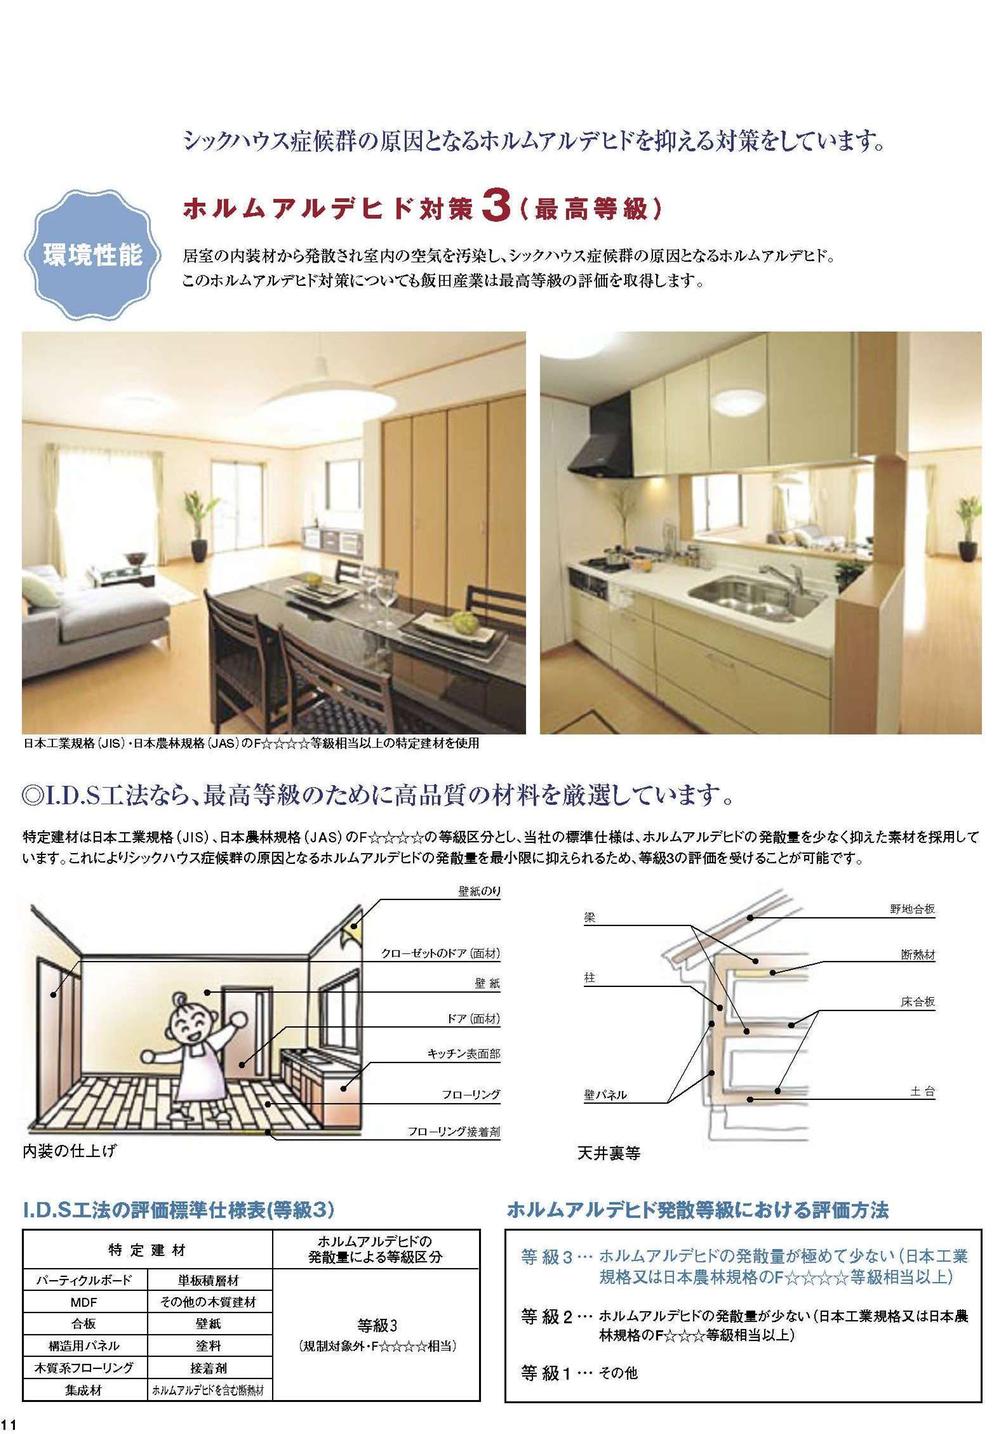 Construction ・ Construction method ・ specification. We are the measures to reduce the formaldehyde cause of sick building syndrome. 